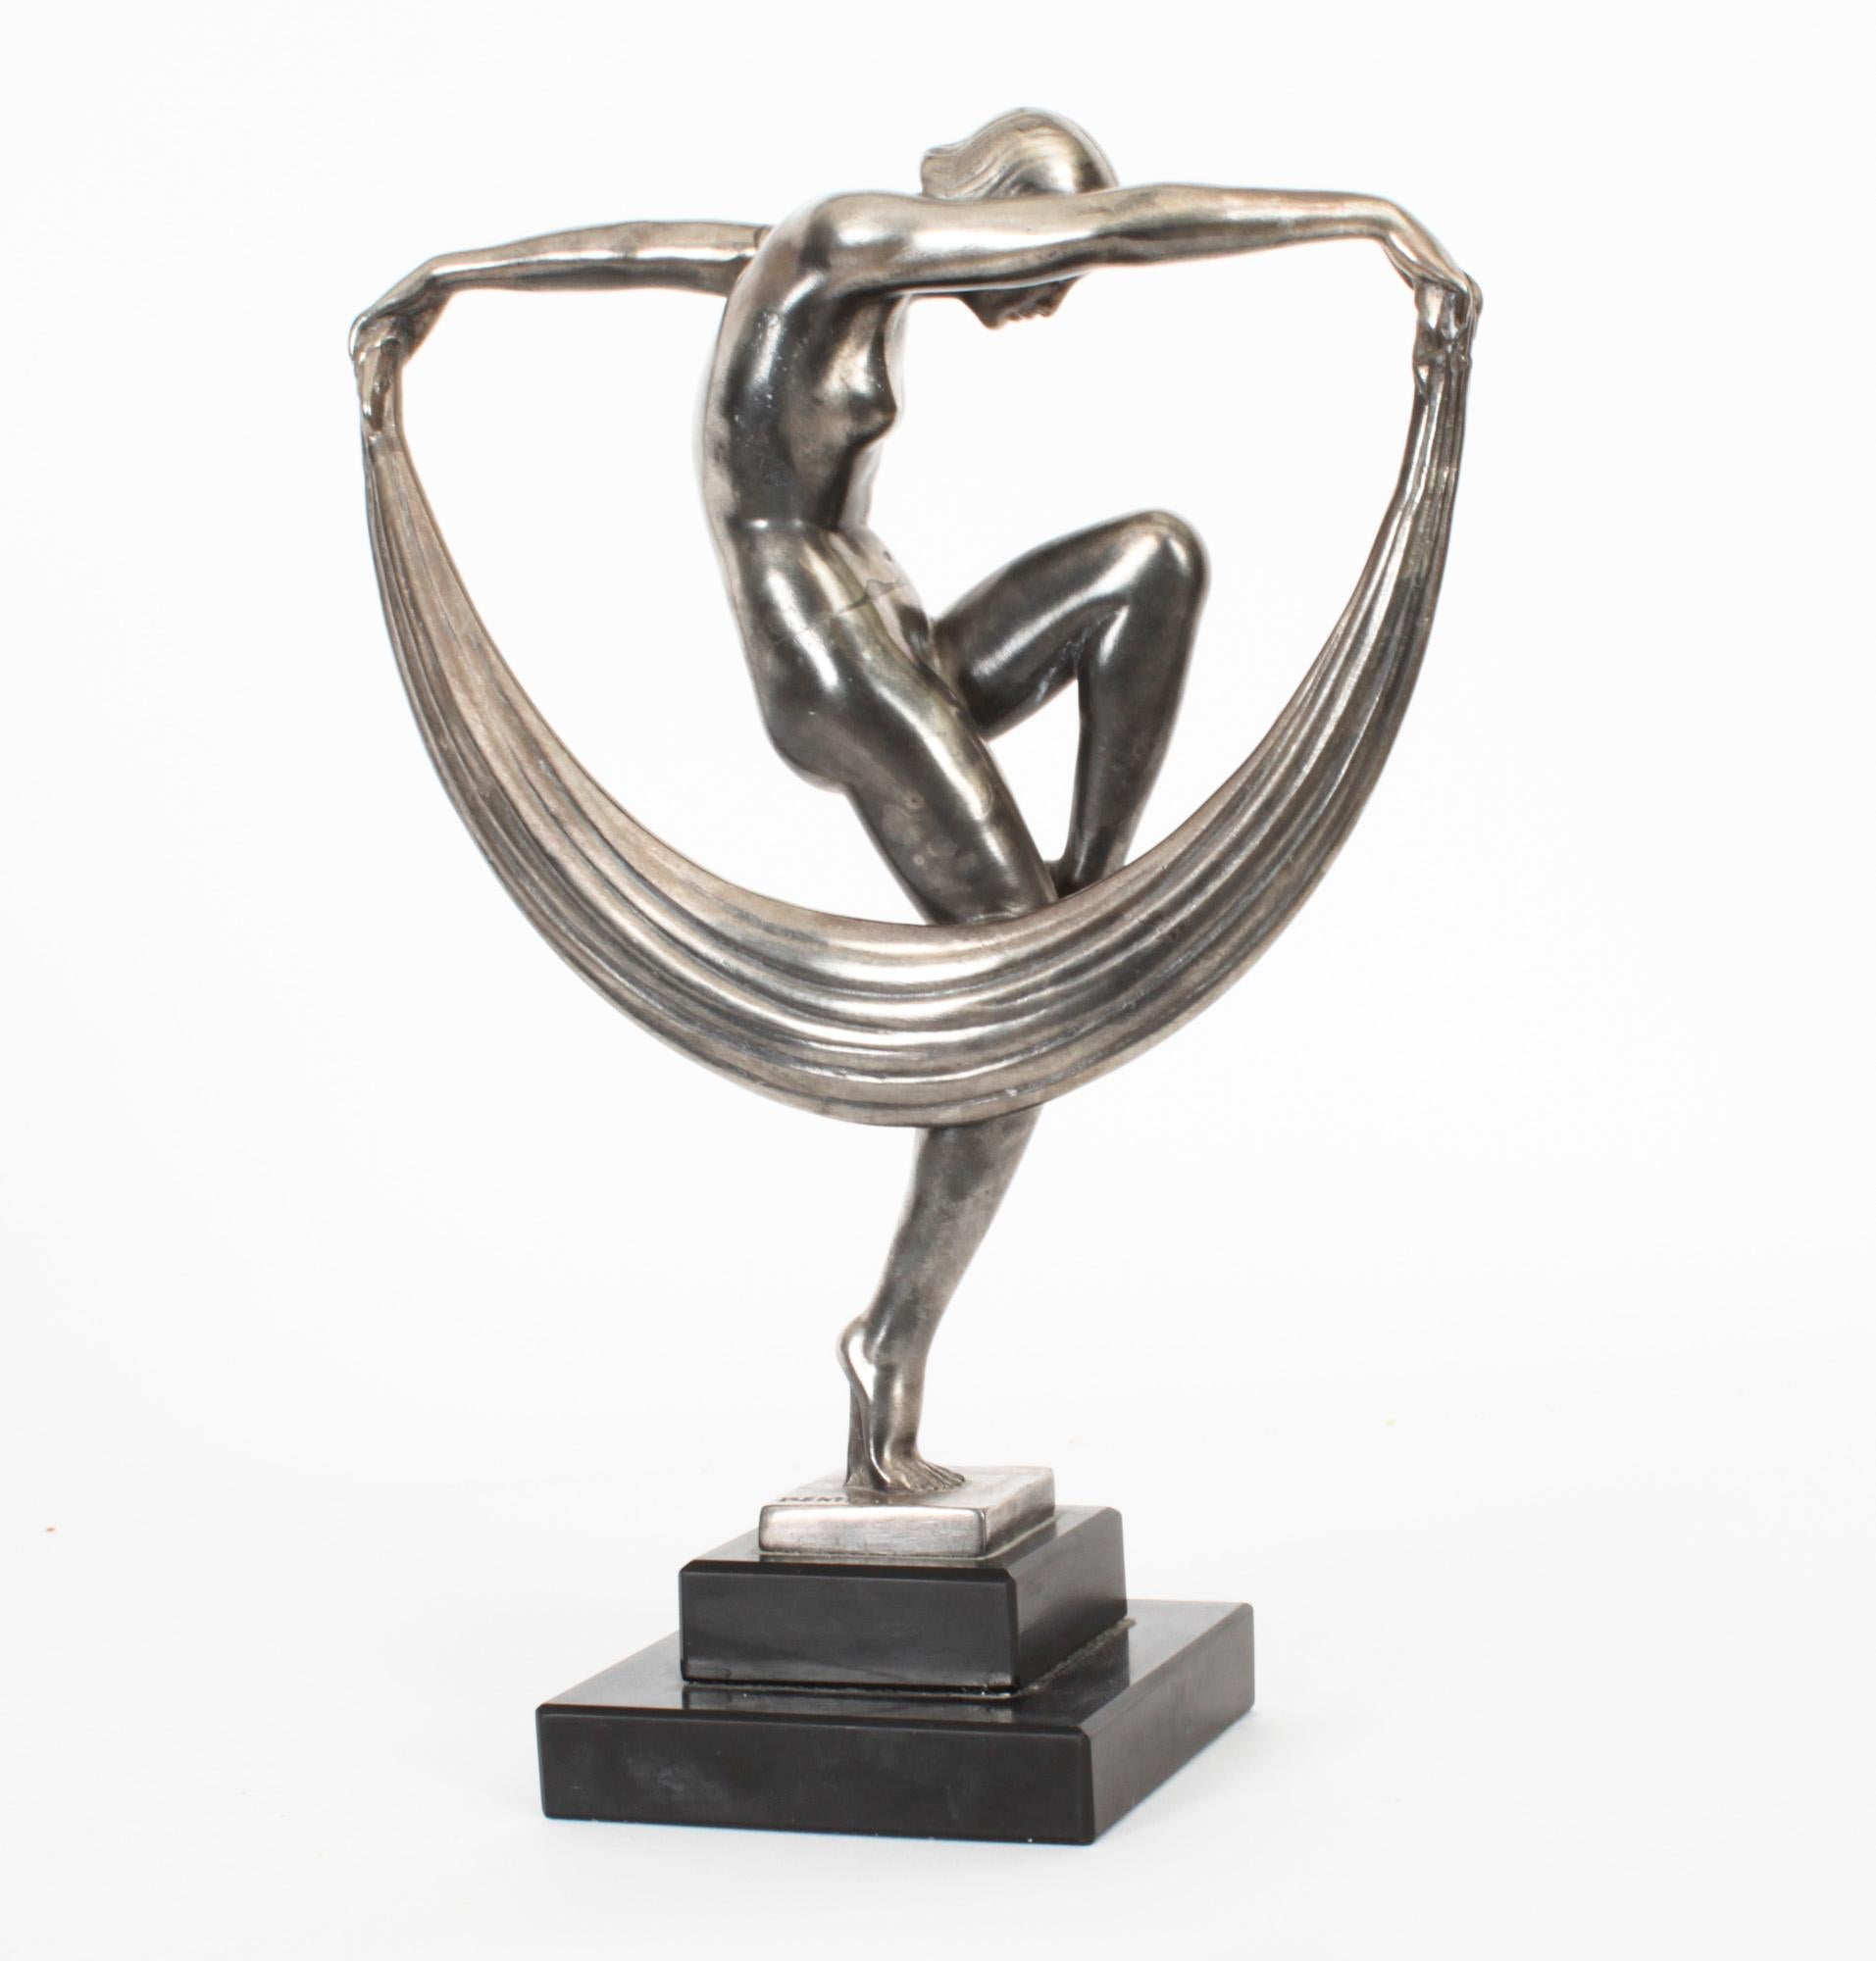 A beautiful Art Deco sculpture of a dancer from Circa 1930 signed DENIS, from the foundry workshop of 